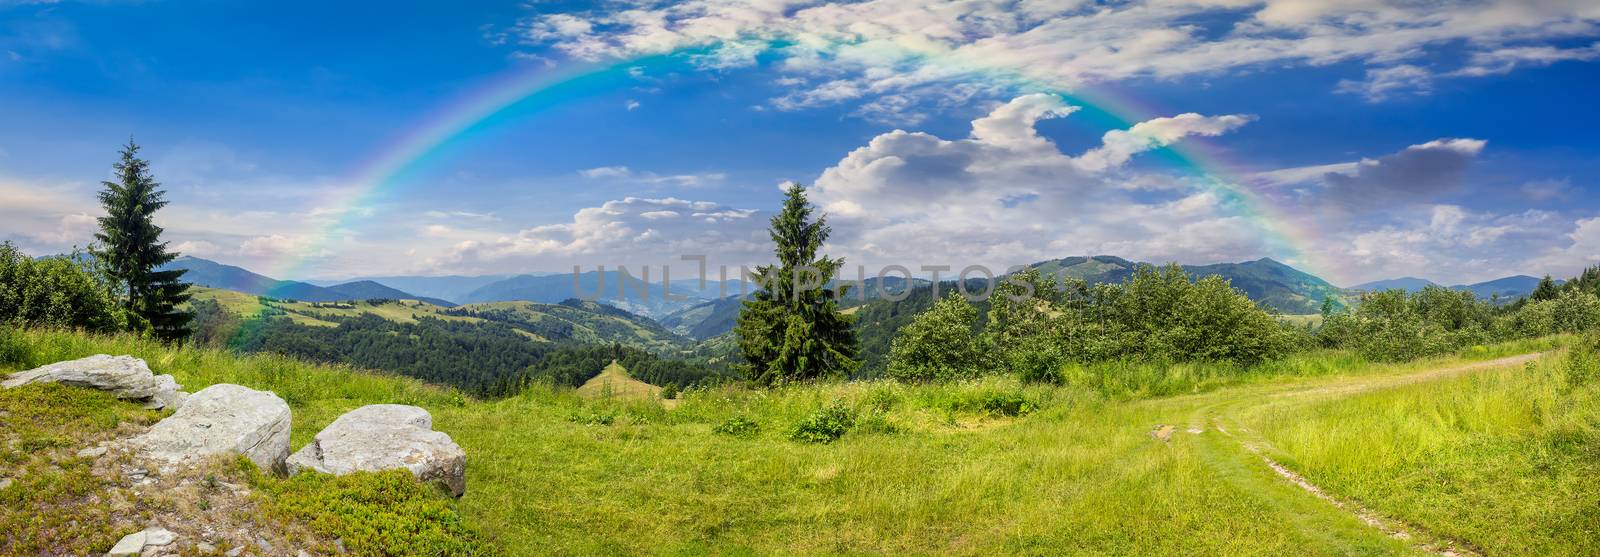 pnoramic collage  landscape. boulders on the meadow with path on the hillside and two pine trees on top of mountain with rainbow